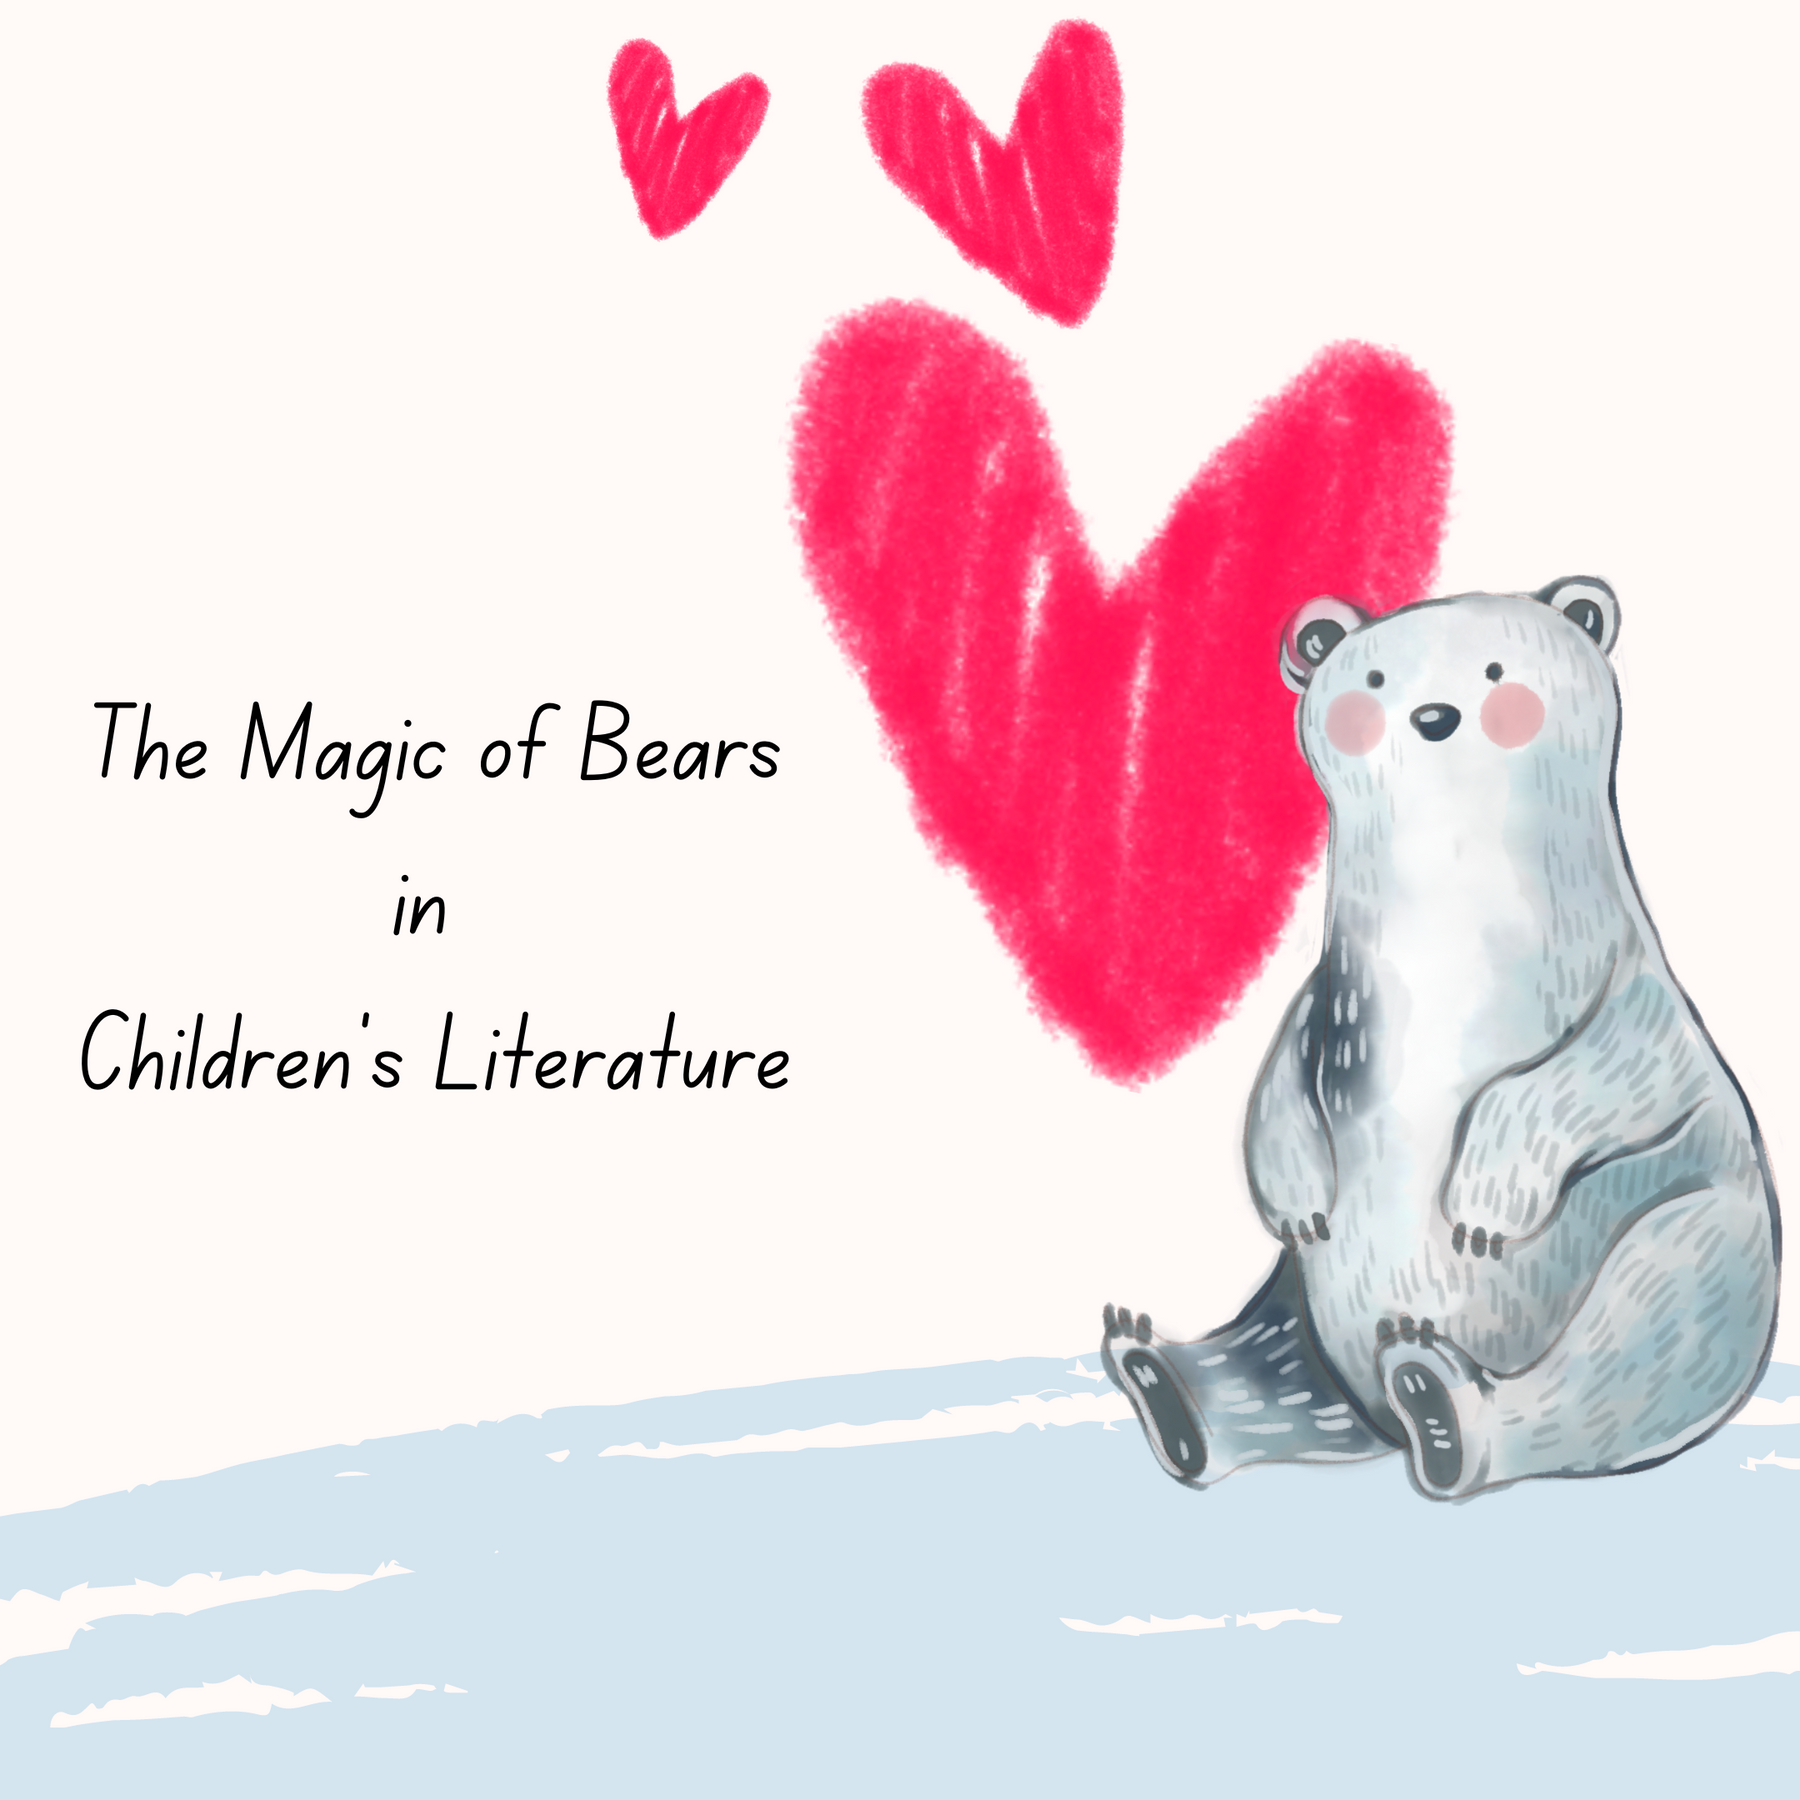 The Magic of Bears in Children's Literature: Why Kids Love These Furry Characters